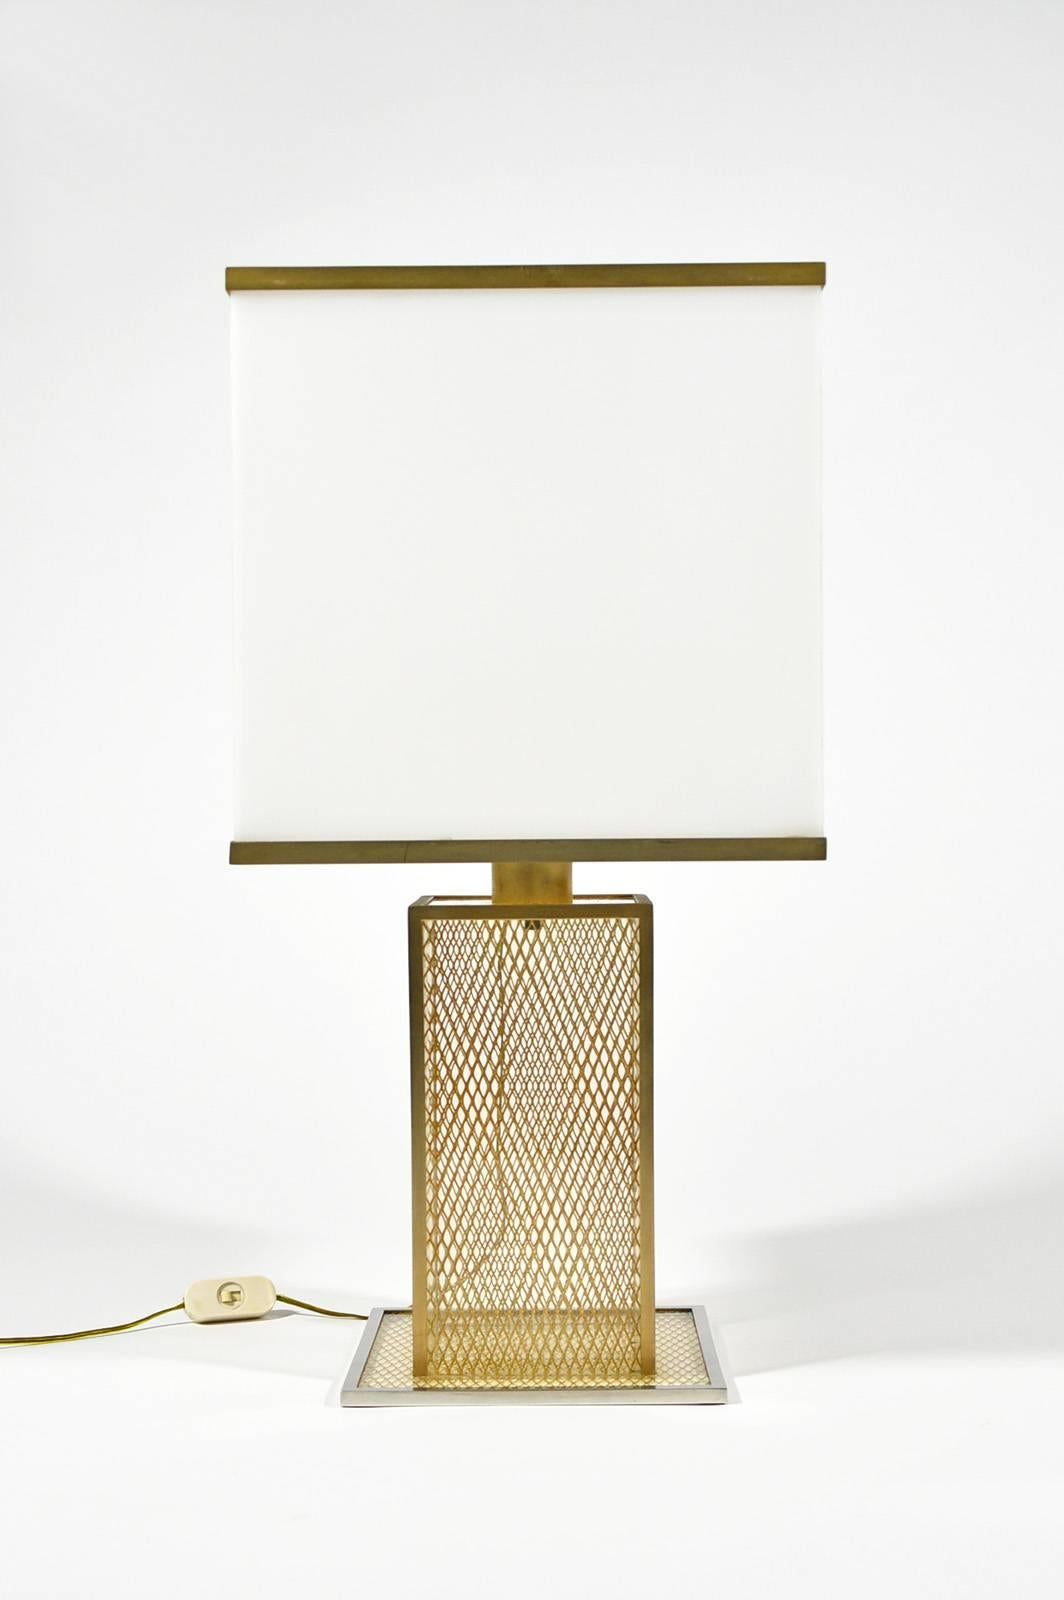 Italian table lamp manufactured circa 1970, in the style of Romeo Rega or Willy Rizzo, featuring a white Lucite shade with brass details and a body made of transparent Lucite with brass grid inclusion.